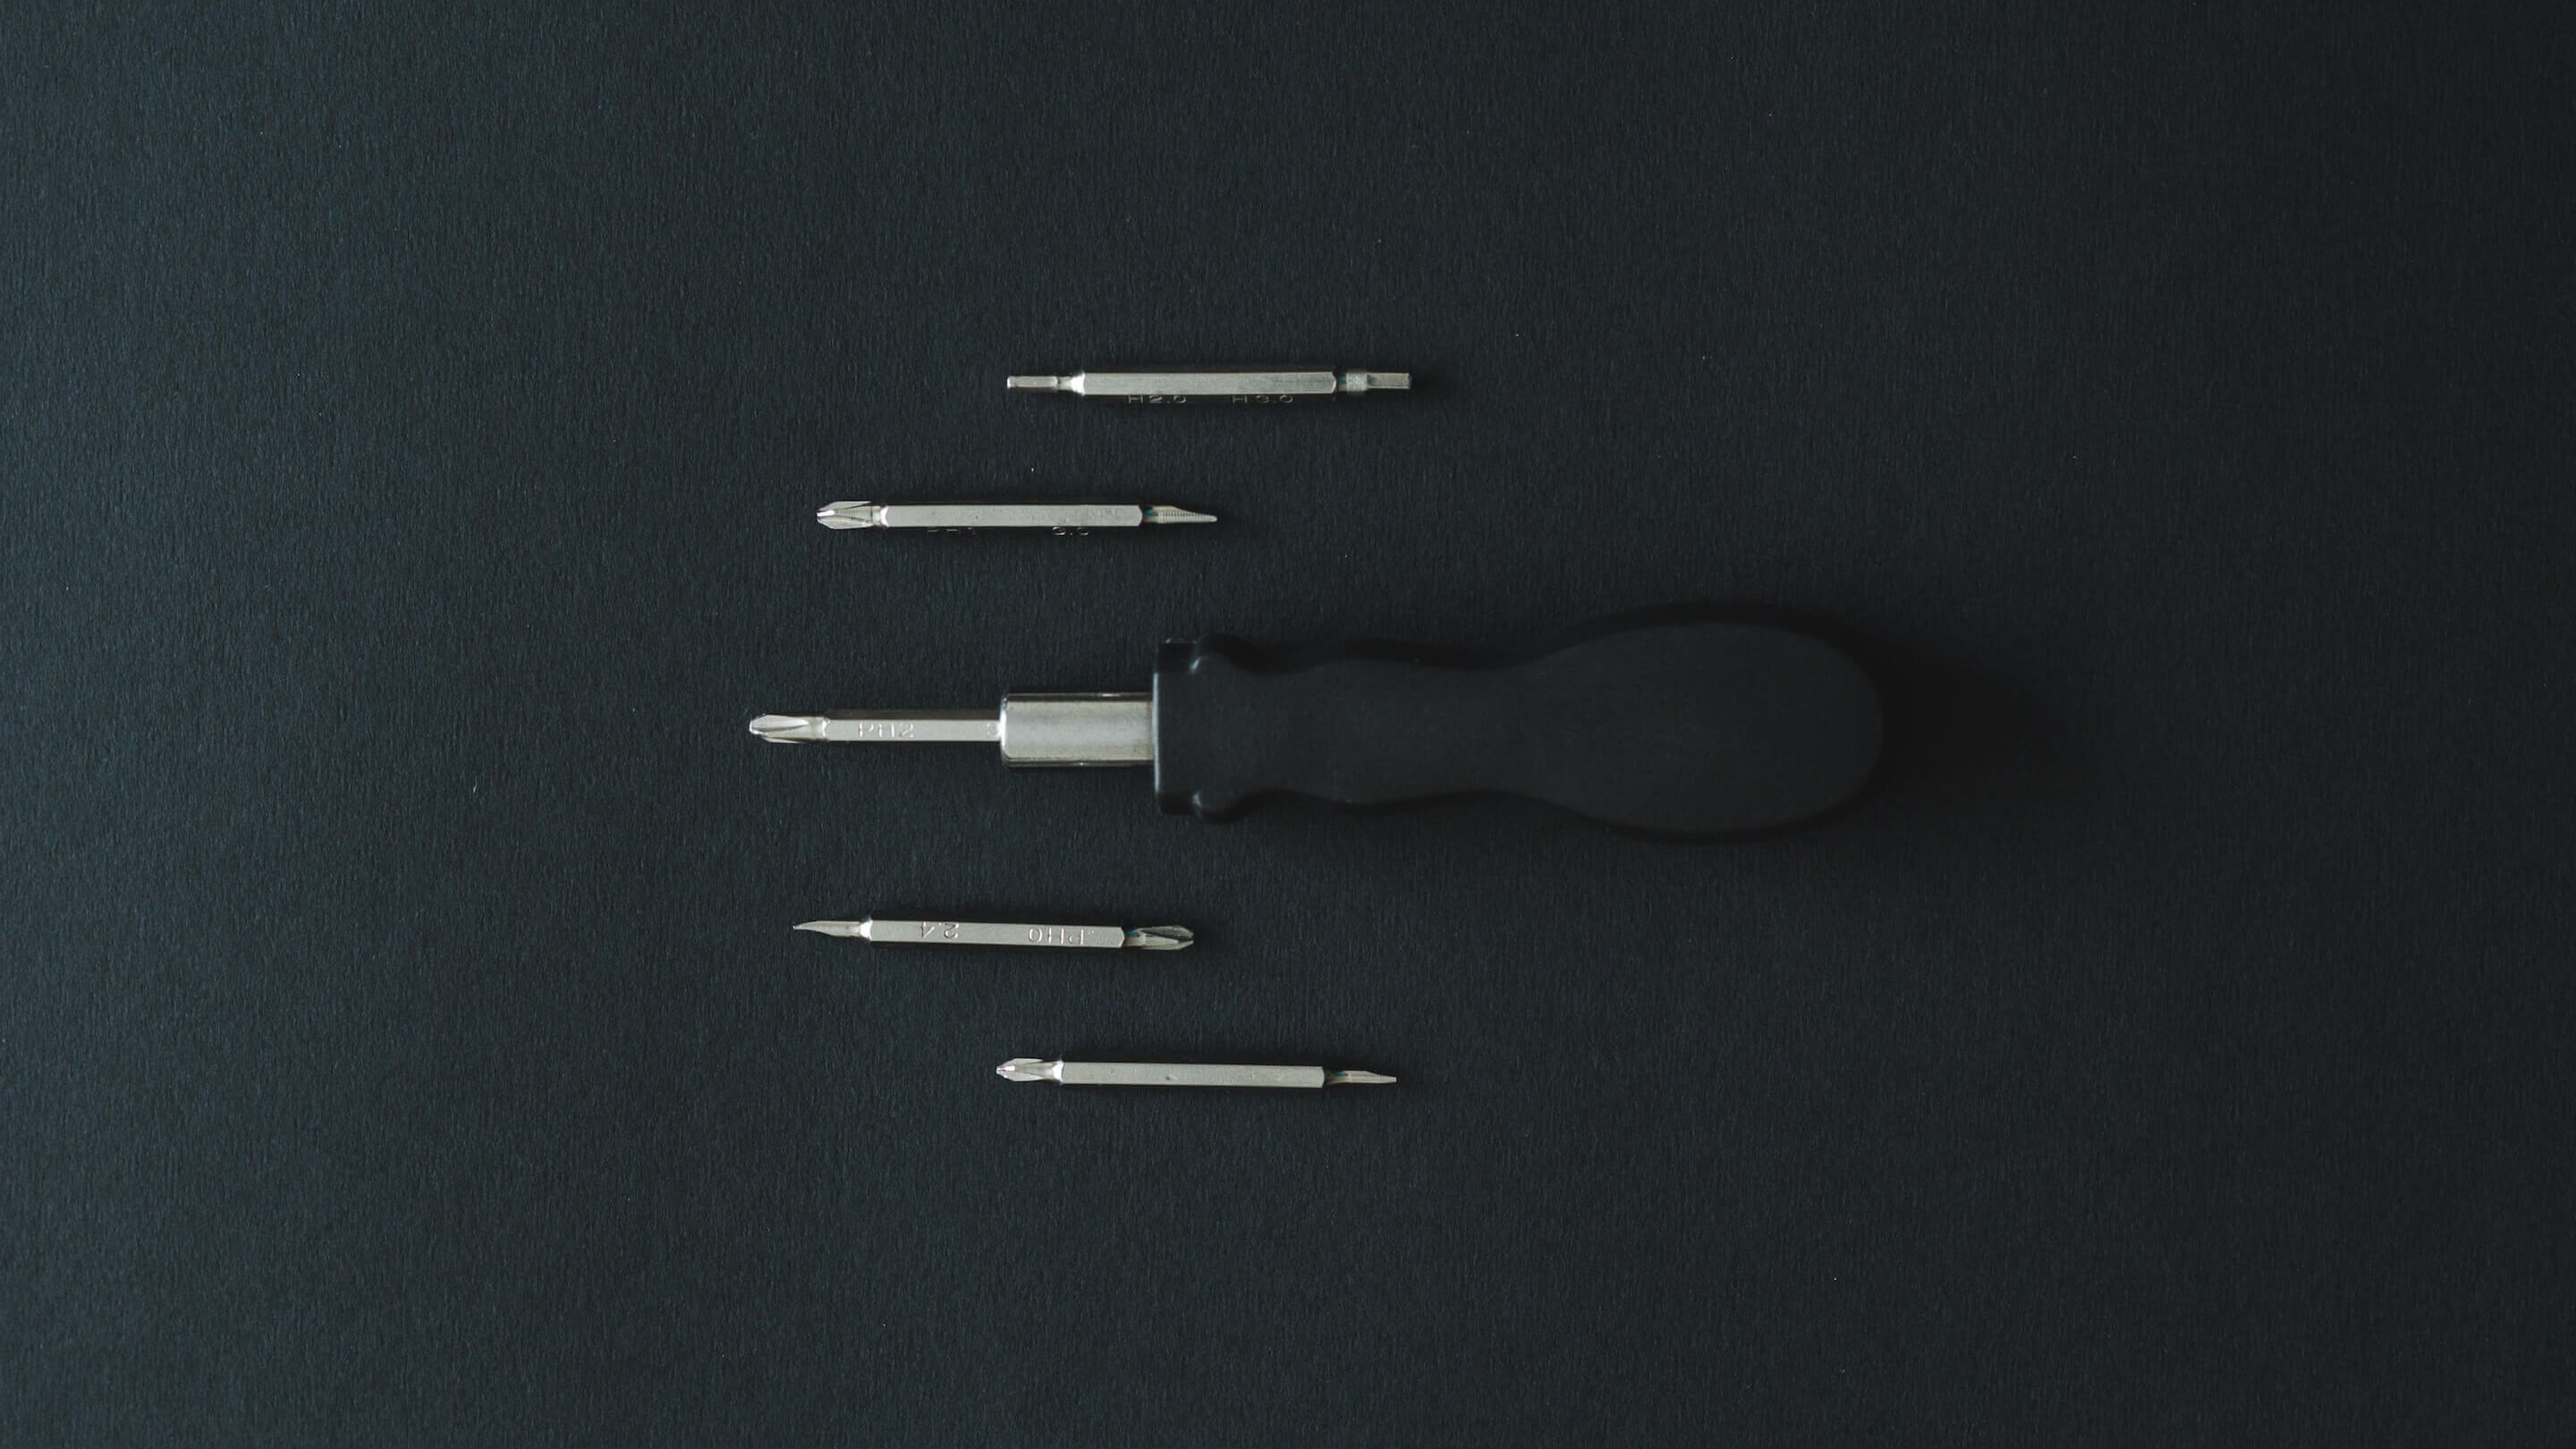 An image of a screwdriver, an essential tool for turning and fastening screws.